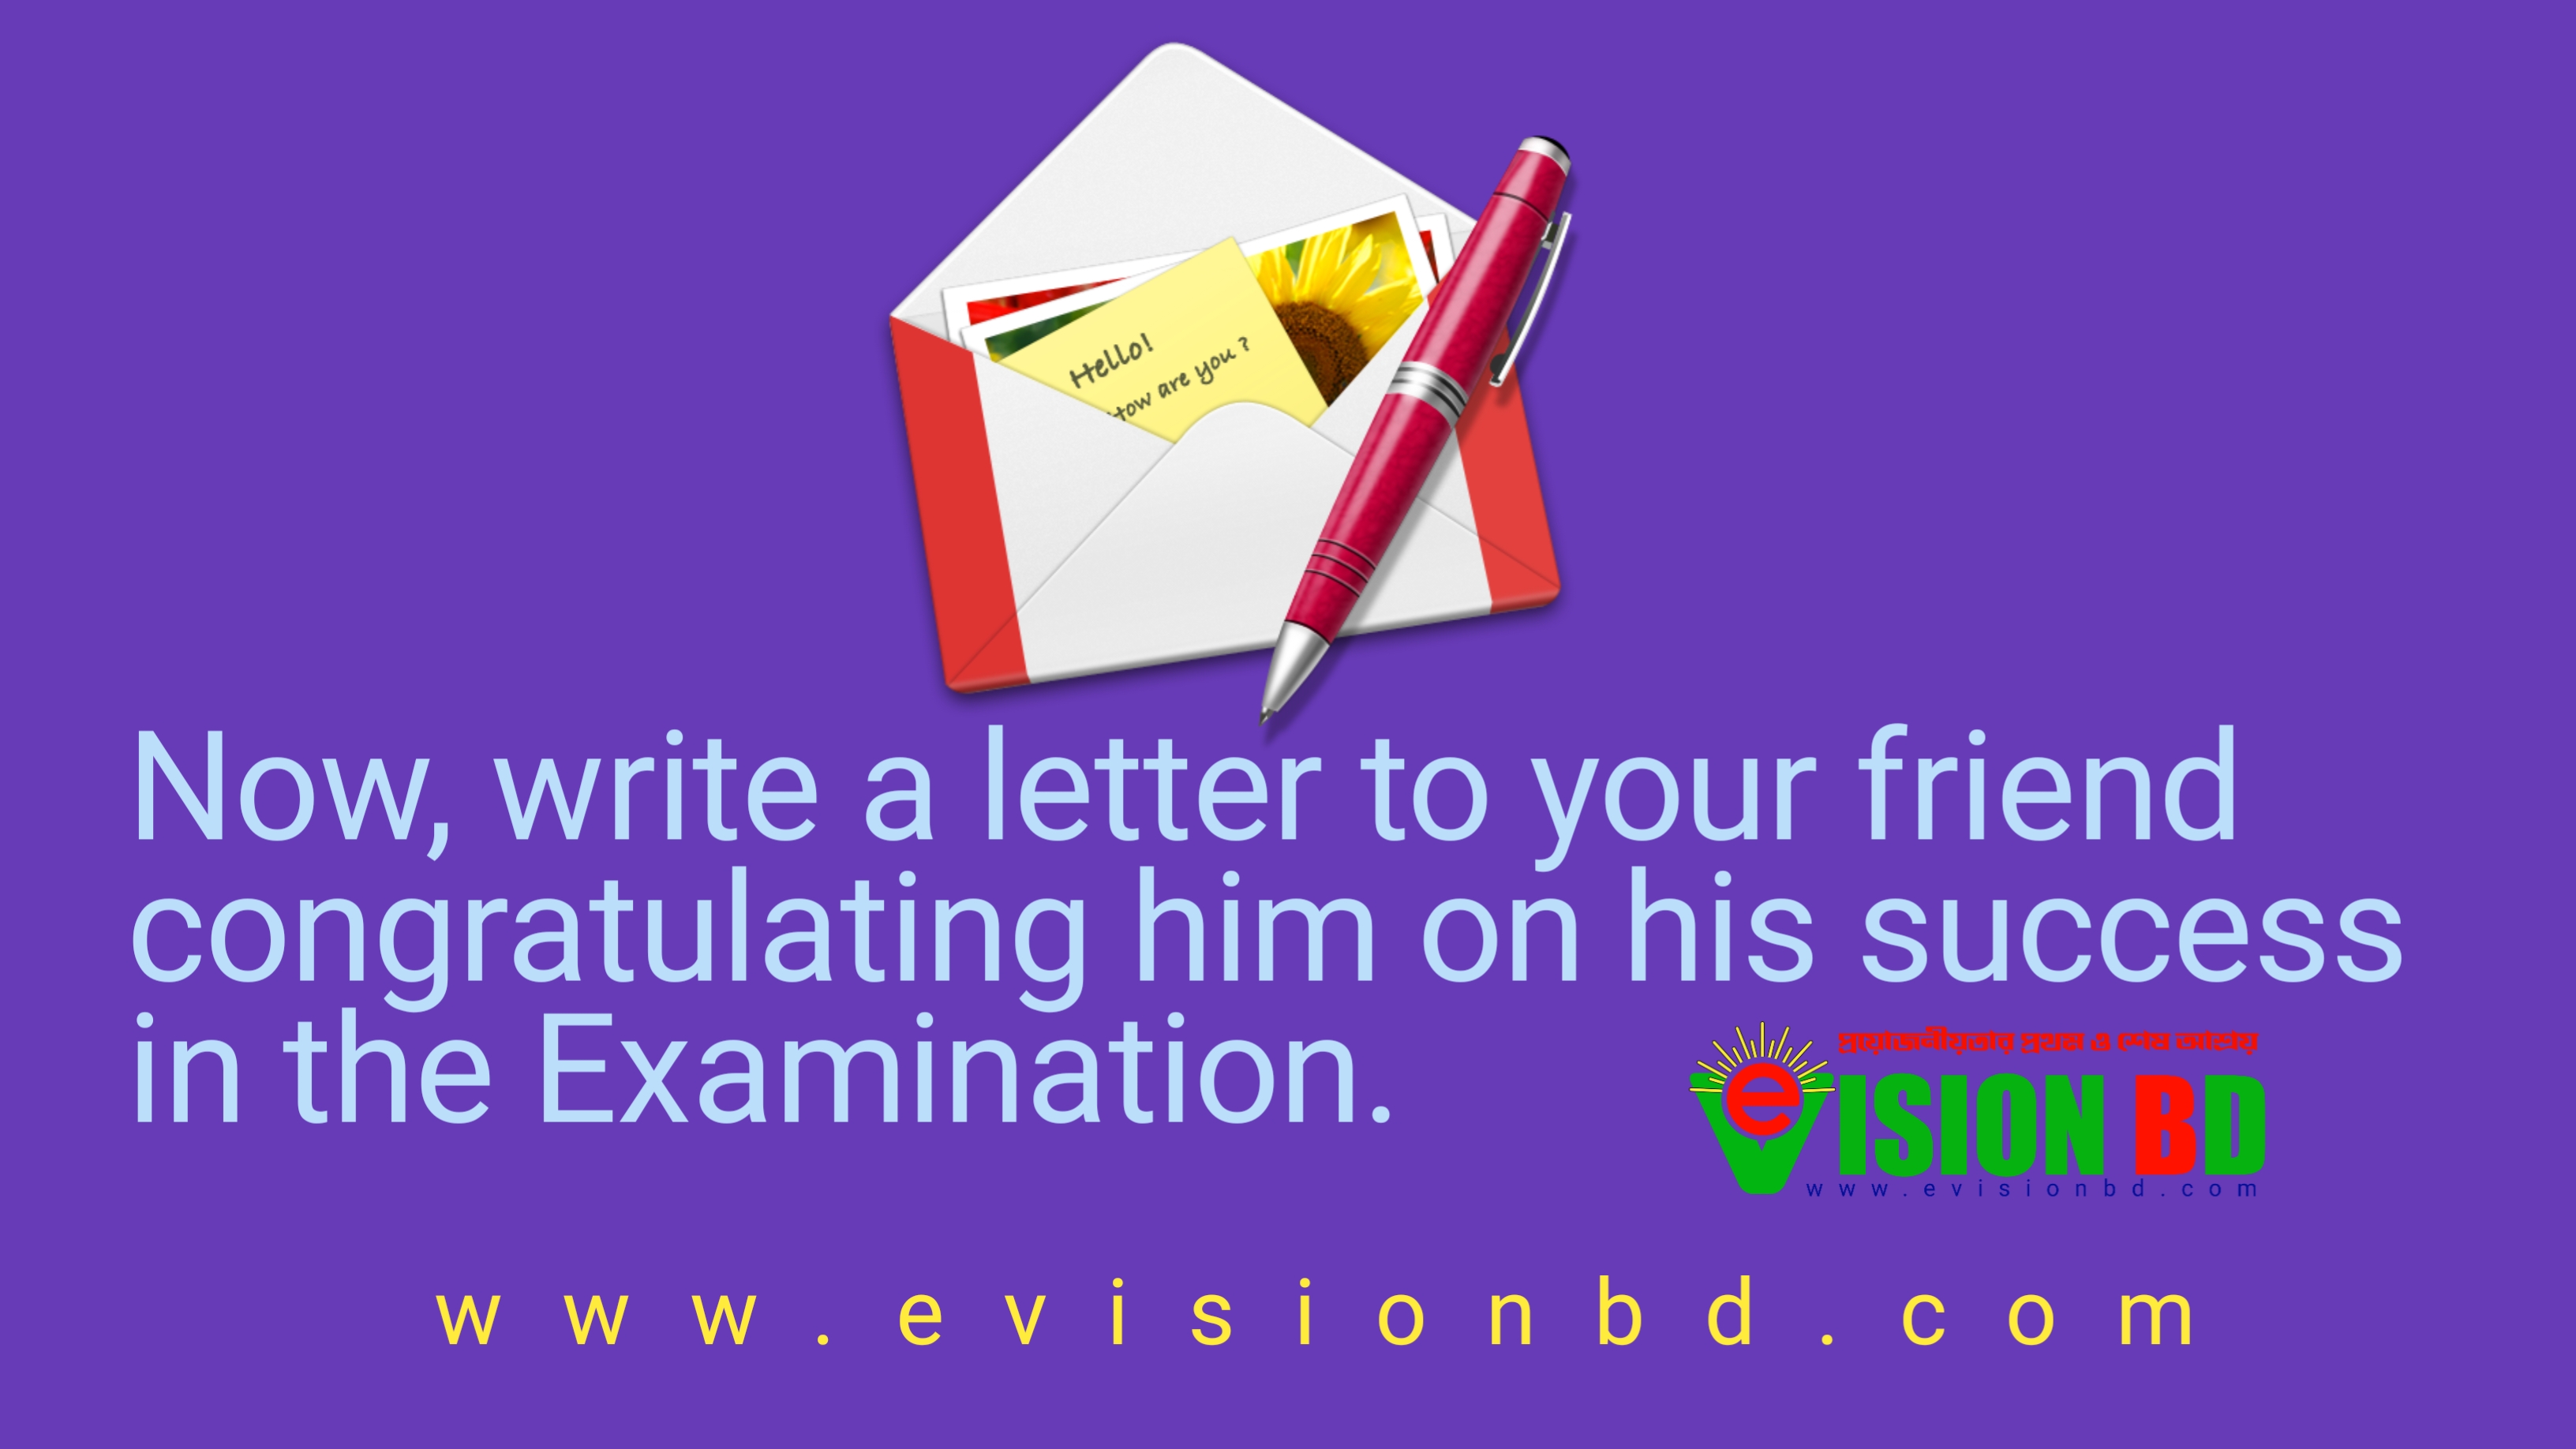 Now, write a letter to your friend congratulating him on his success in the Examination